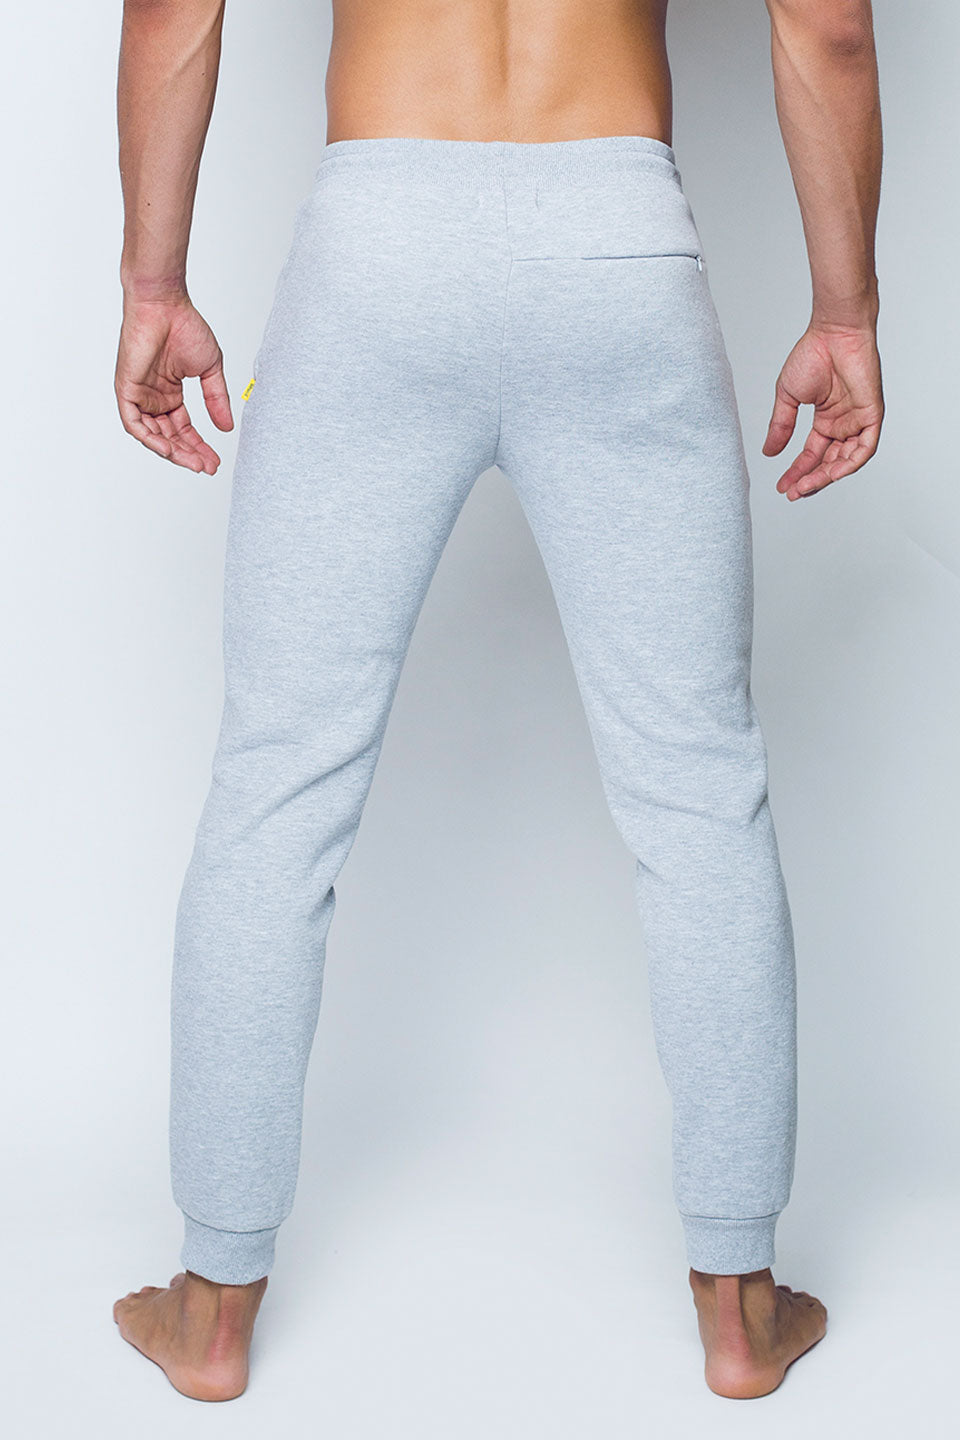 Recovery Pants - Grey Marle